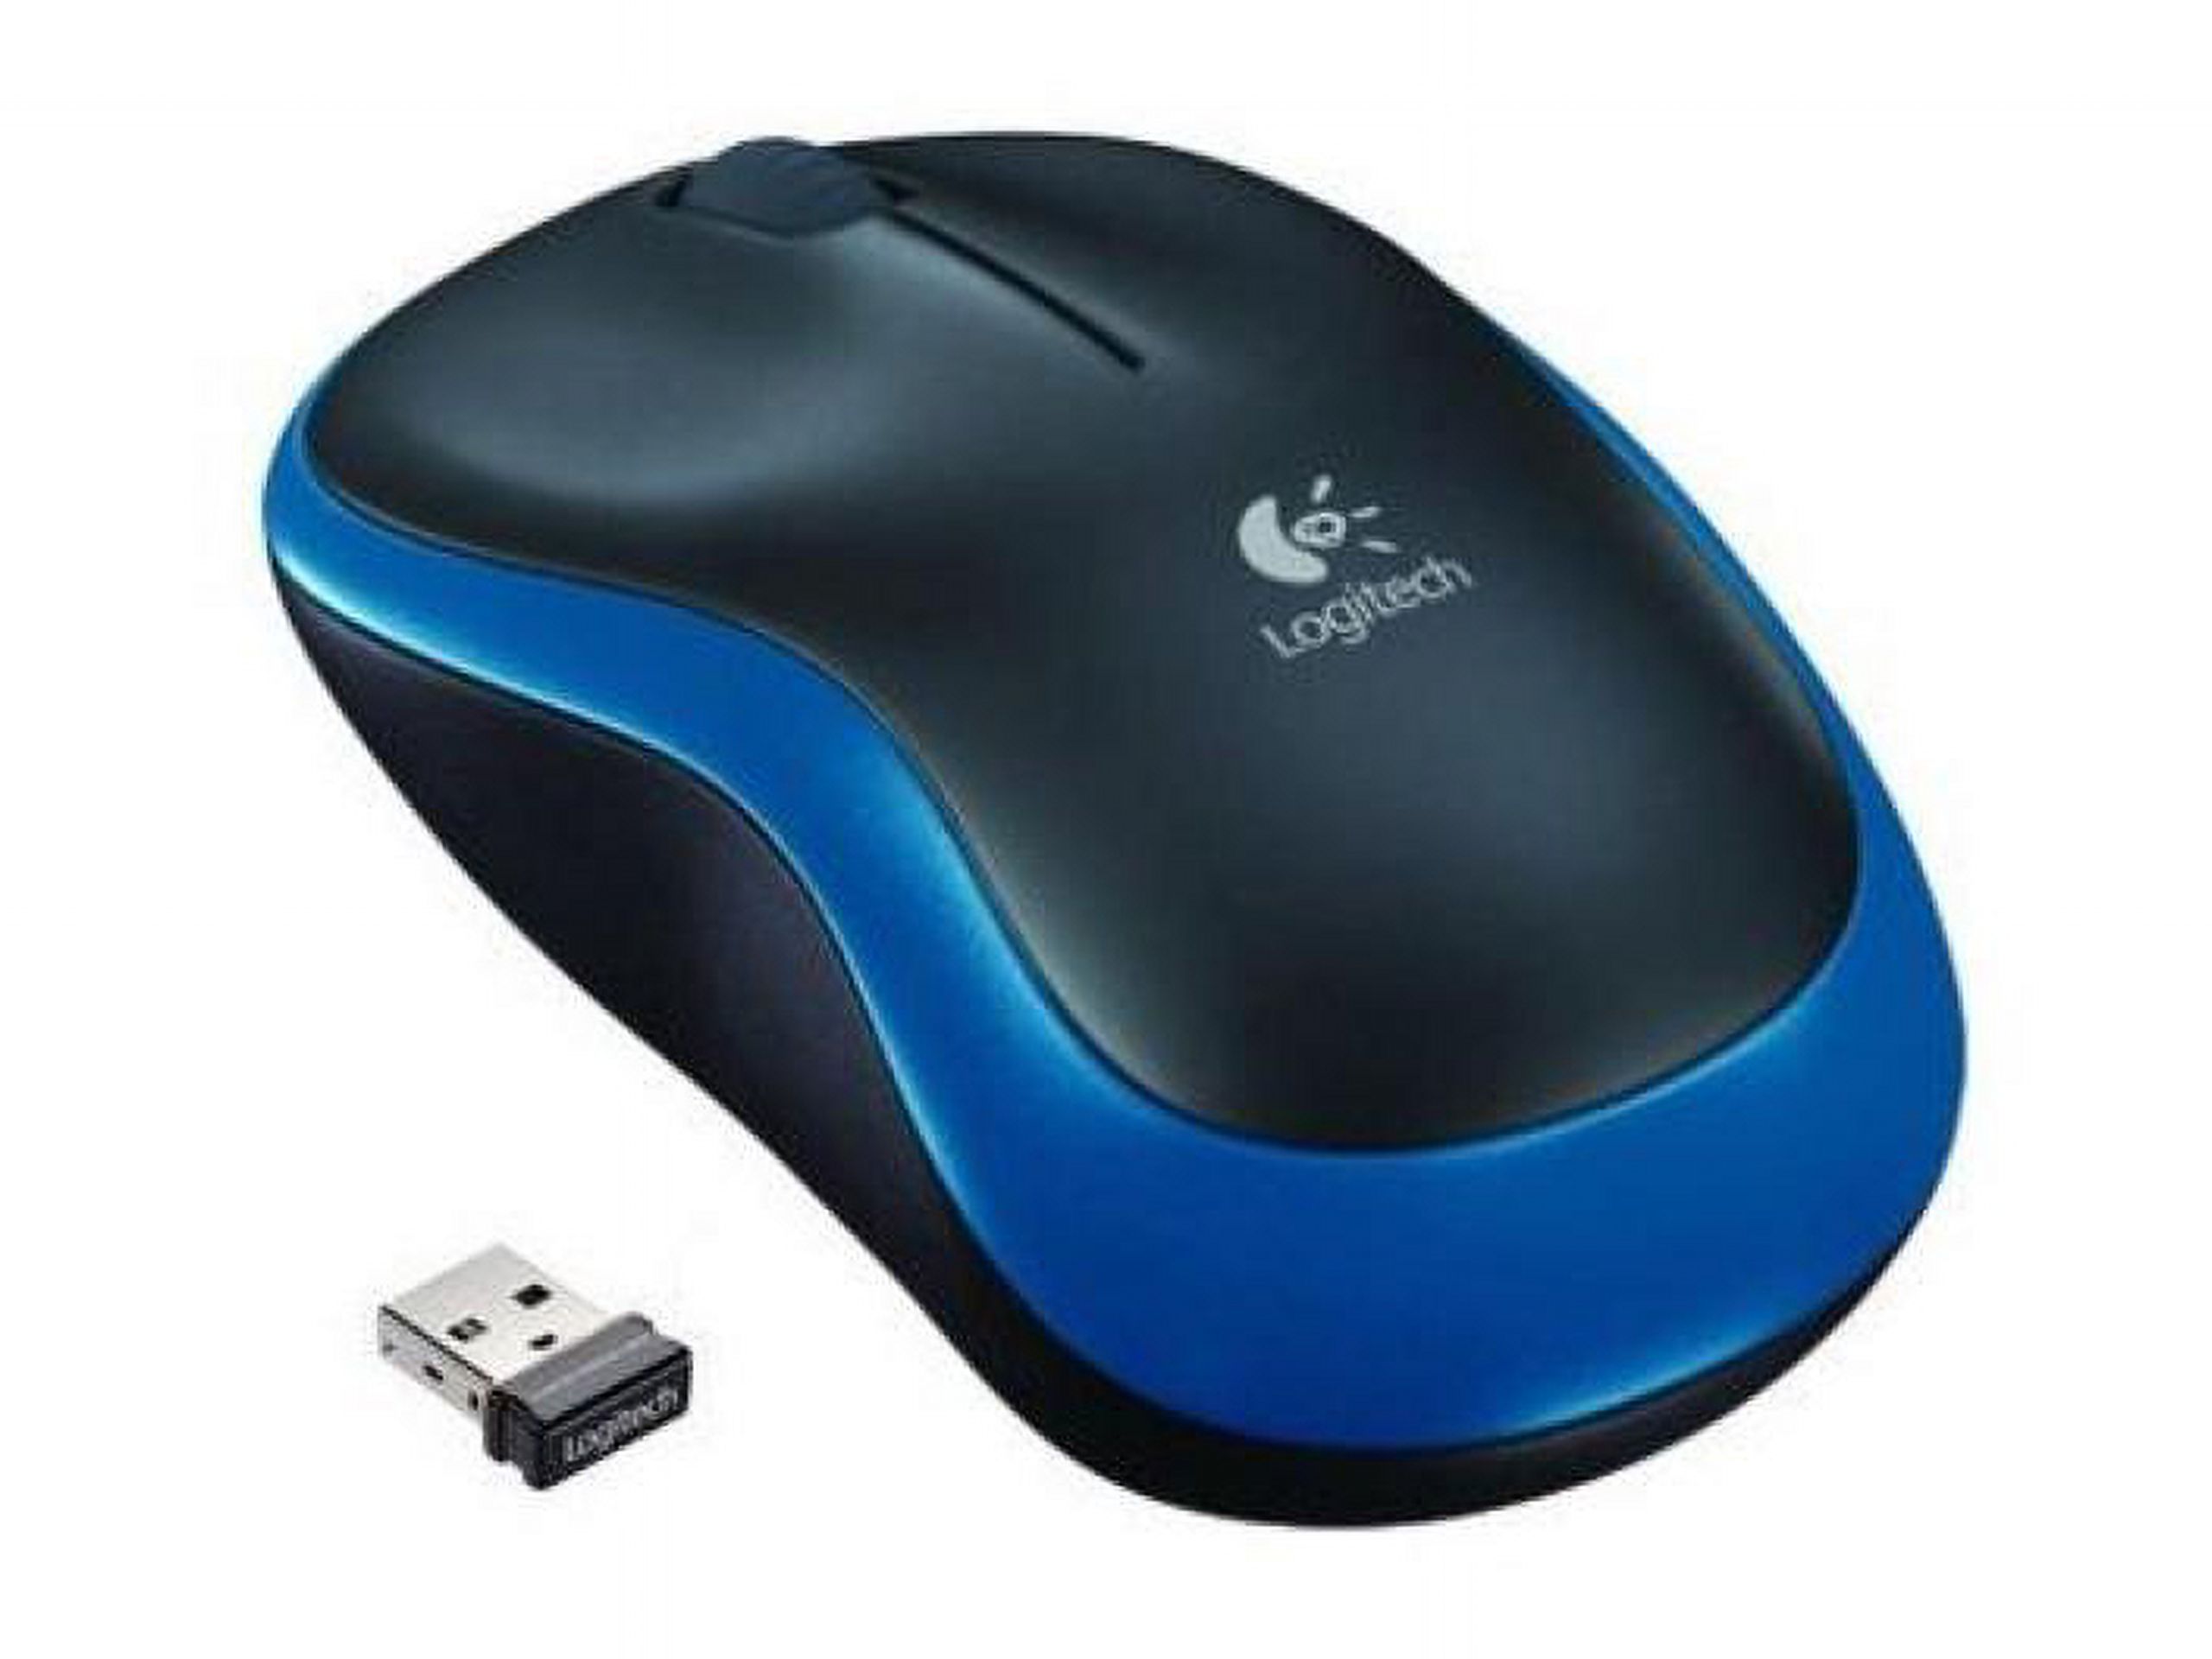 Logitech M185 Wireless Mouse, 2.4GHz with USB Mini Receiver, Ambidextrous, Blue - image 4 of 15